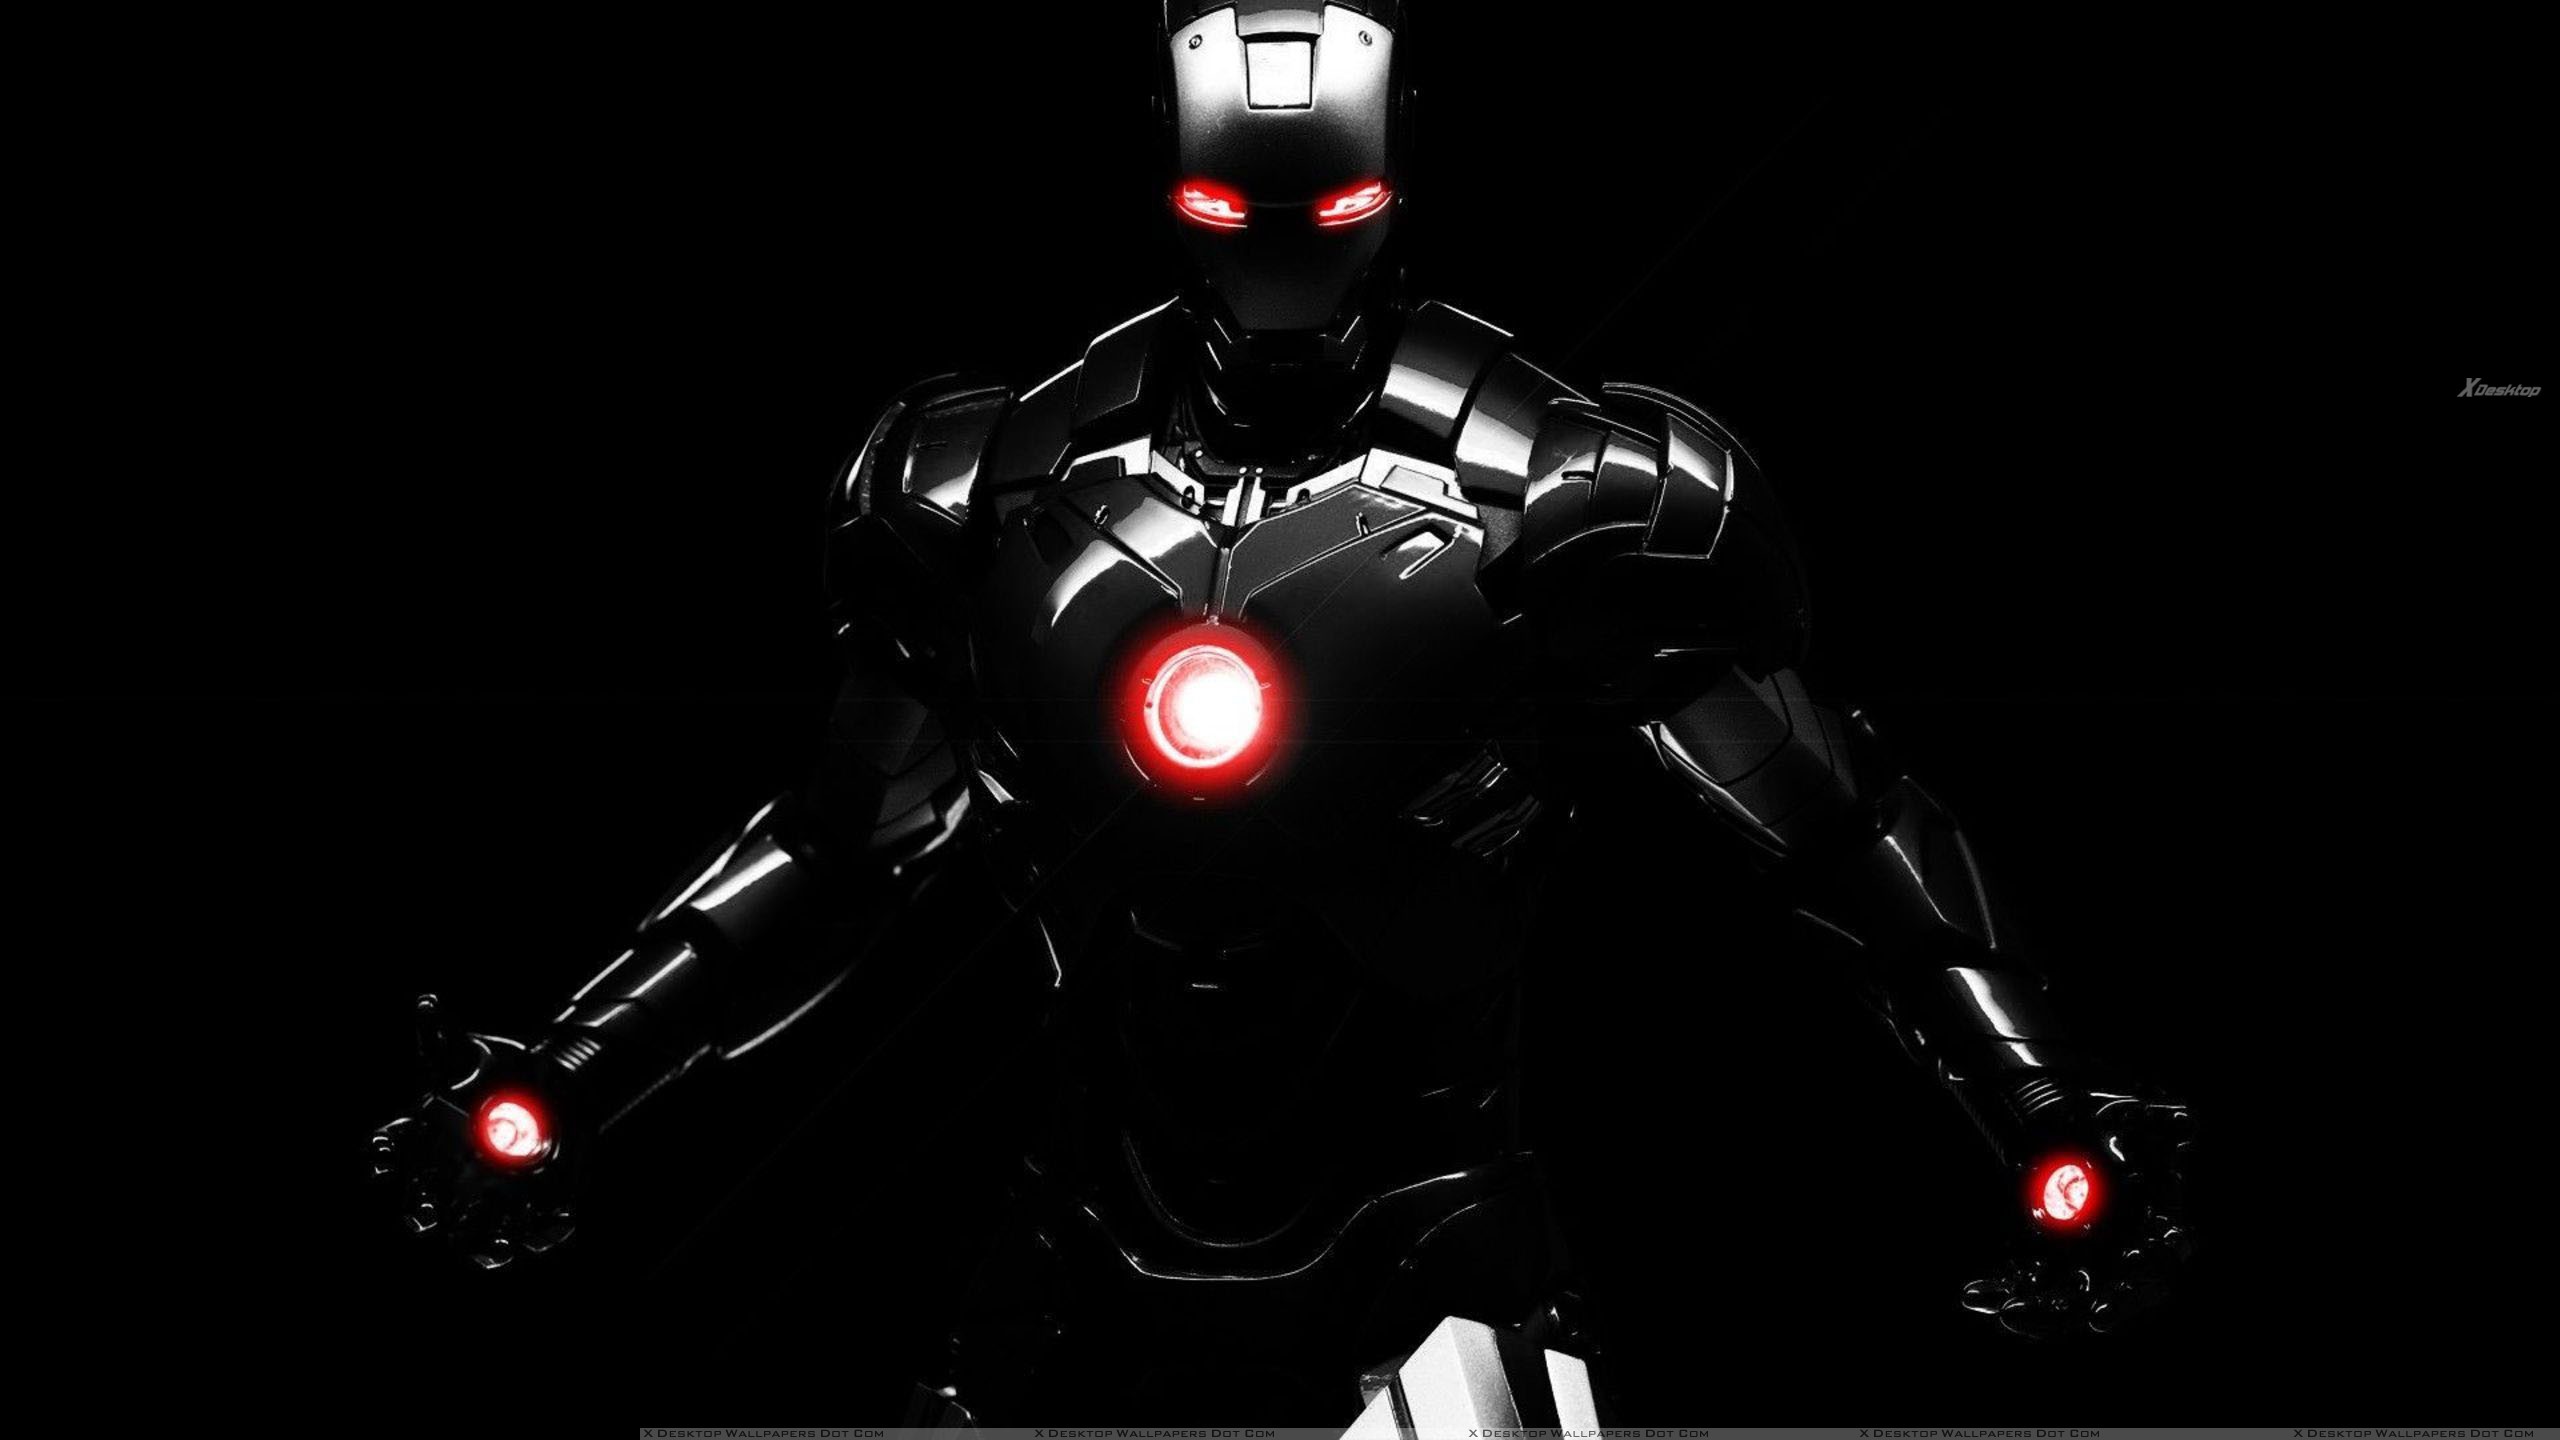 Iron Man Suit In Launching Position Wallpaper